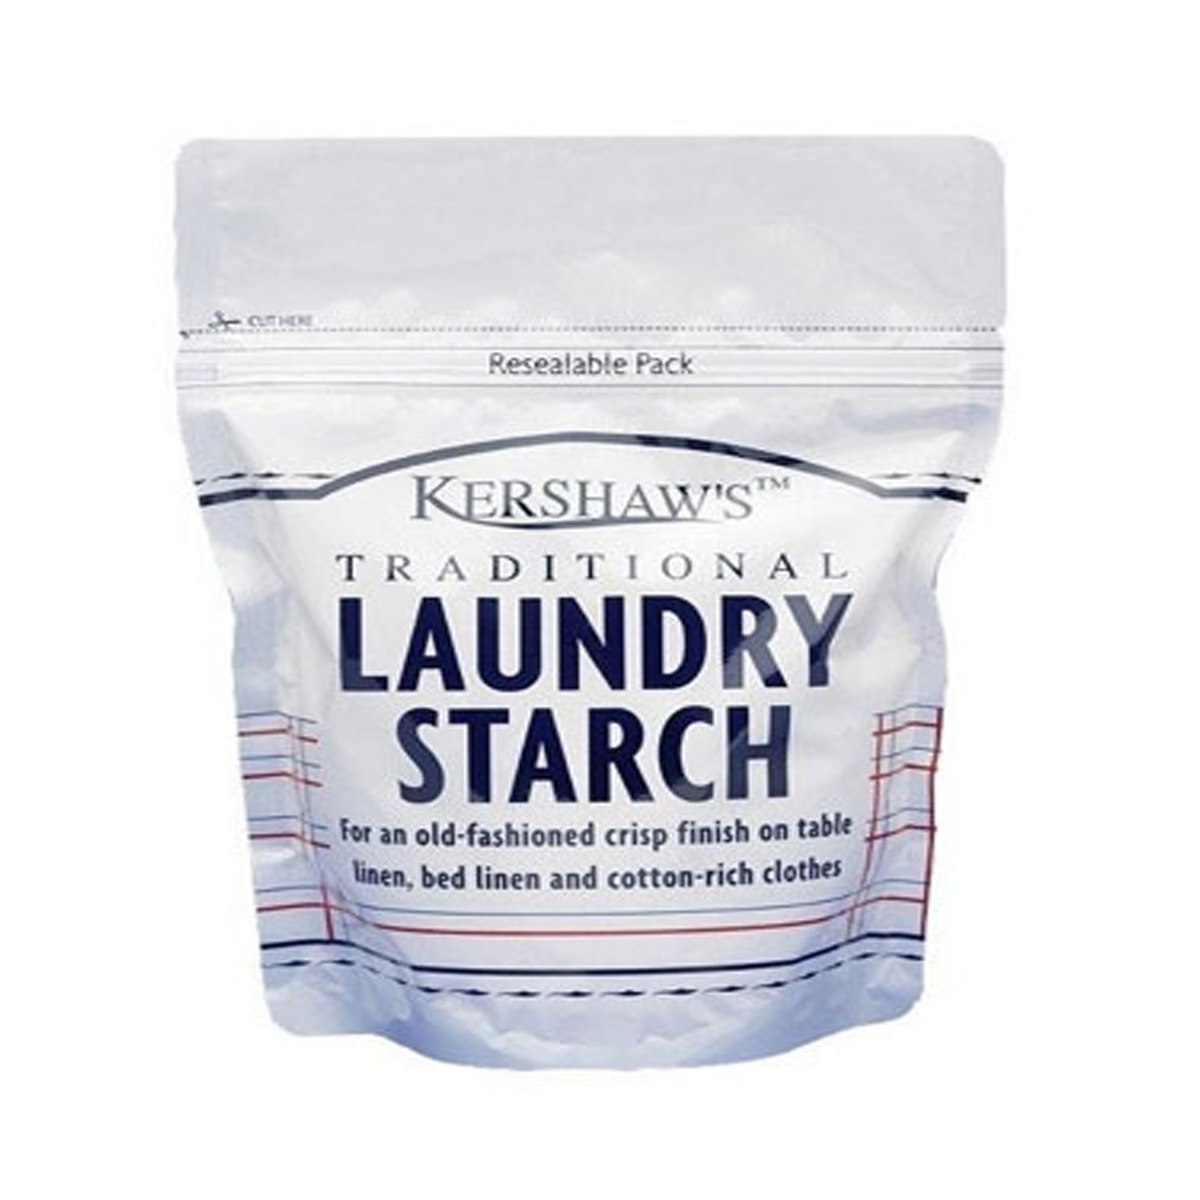 Kershaws Traditional Laundry Starch 500g